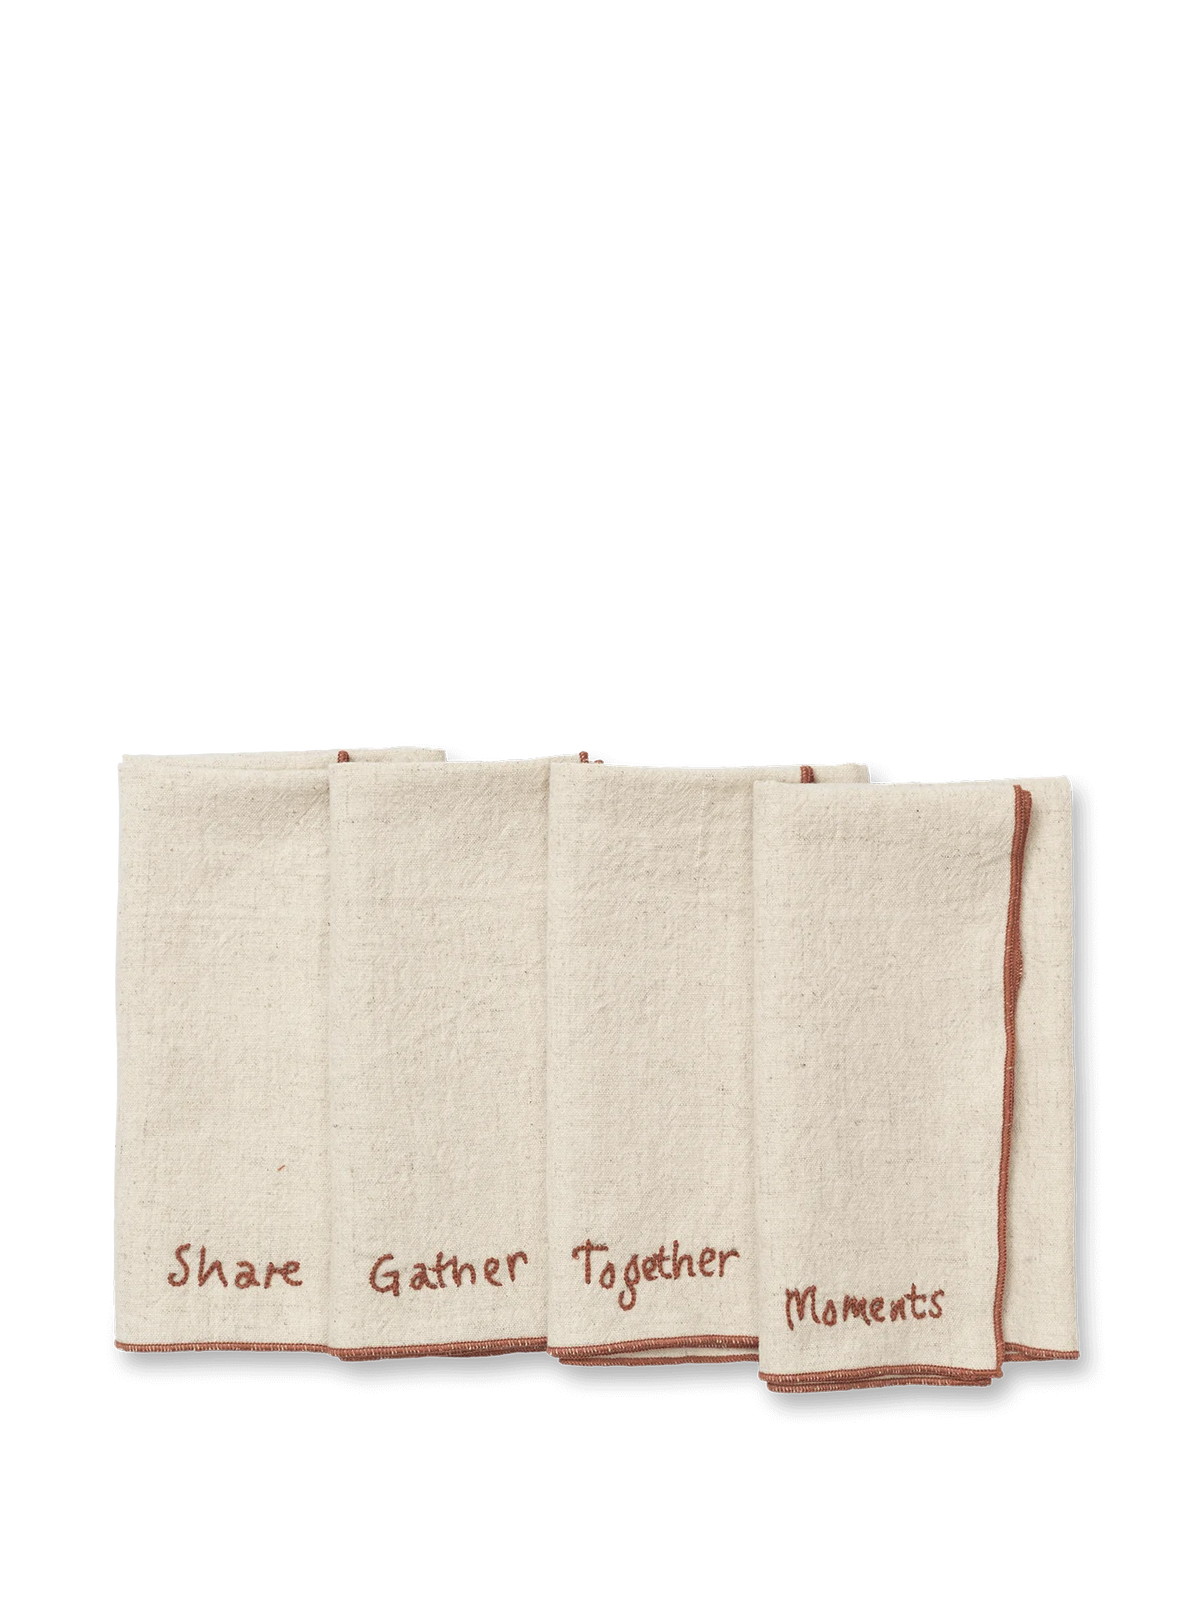 Occasion Napkins - Set of 4 by Ferm Living